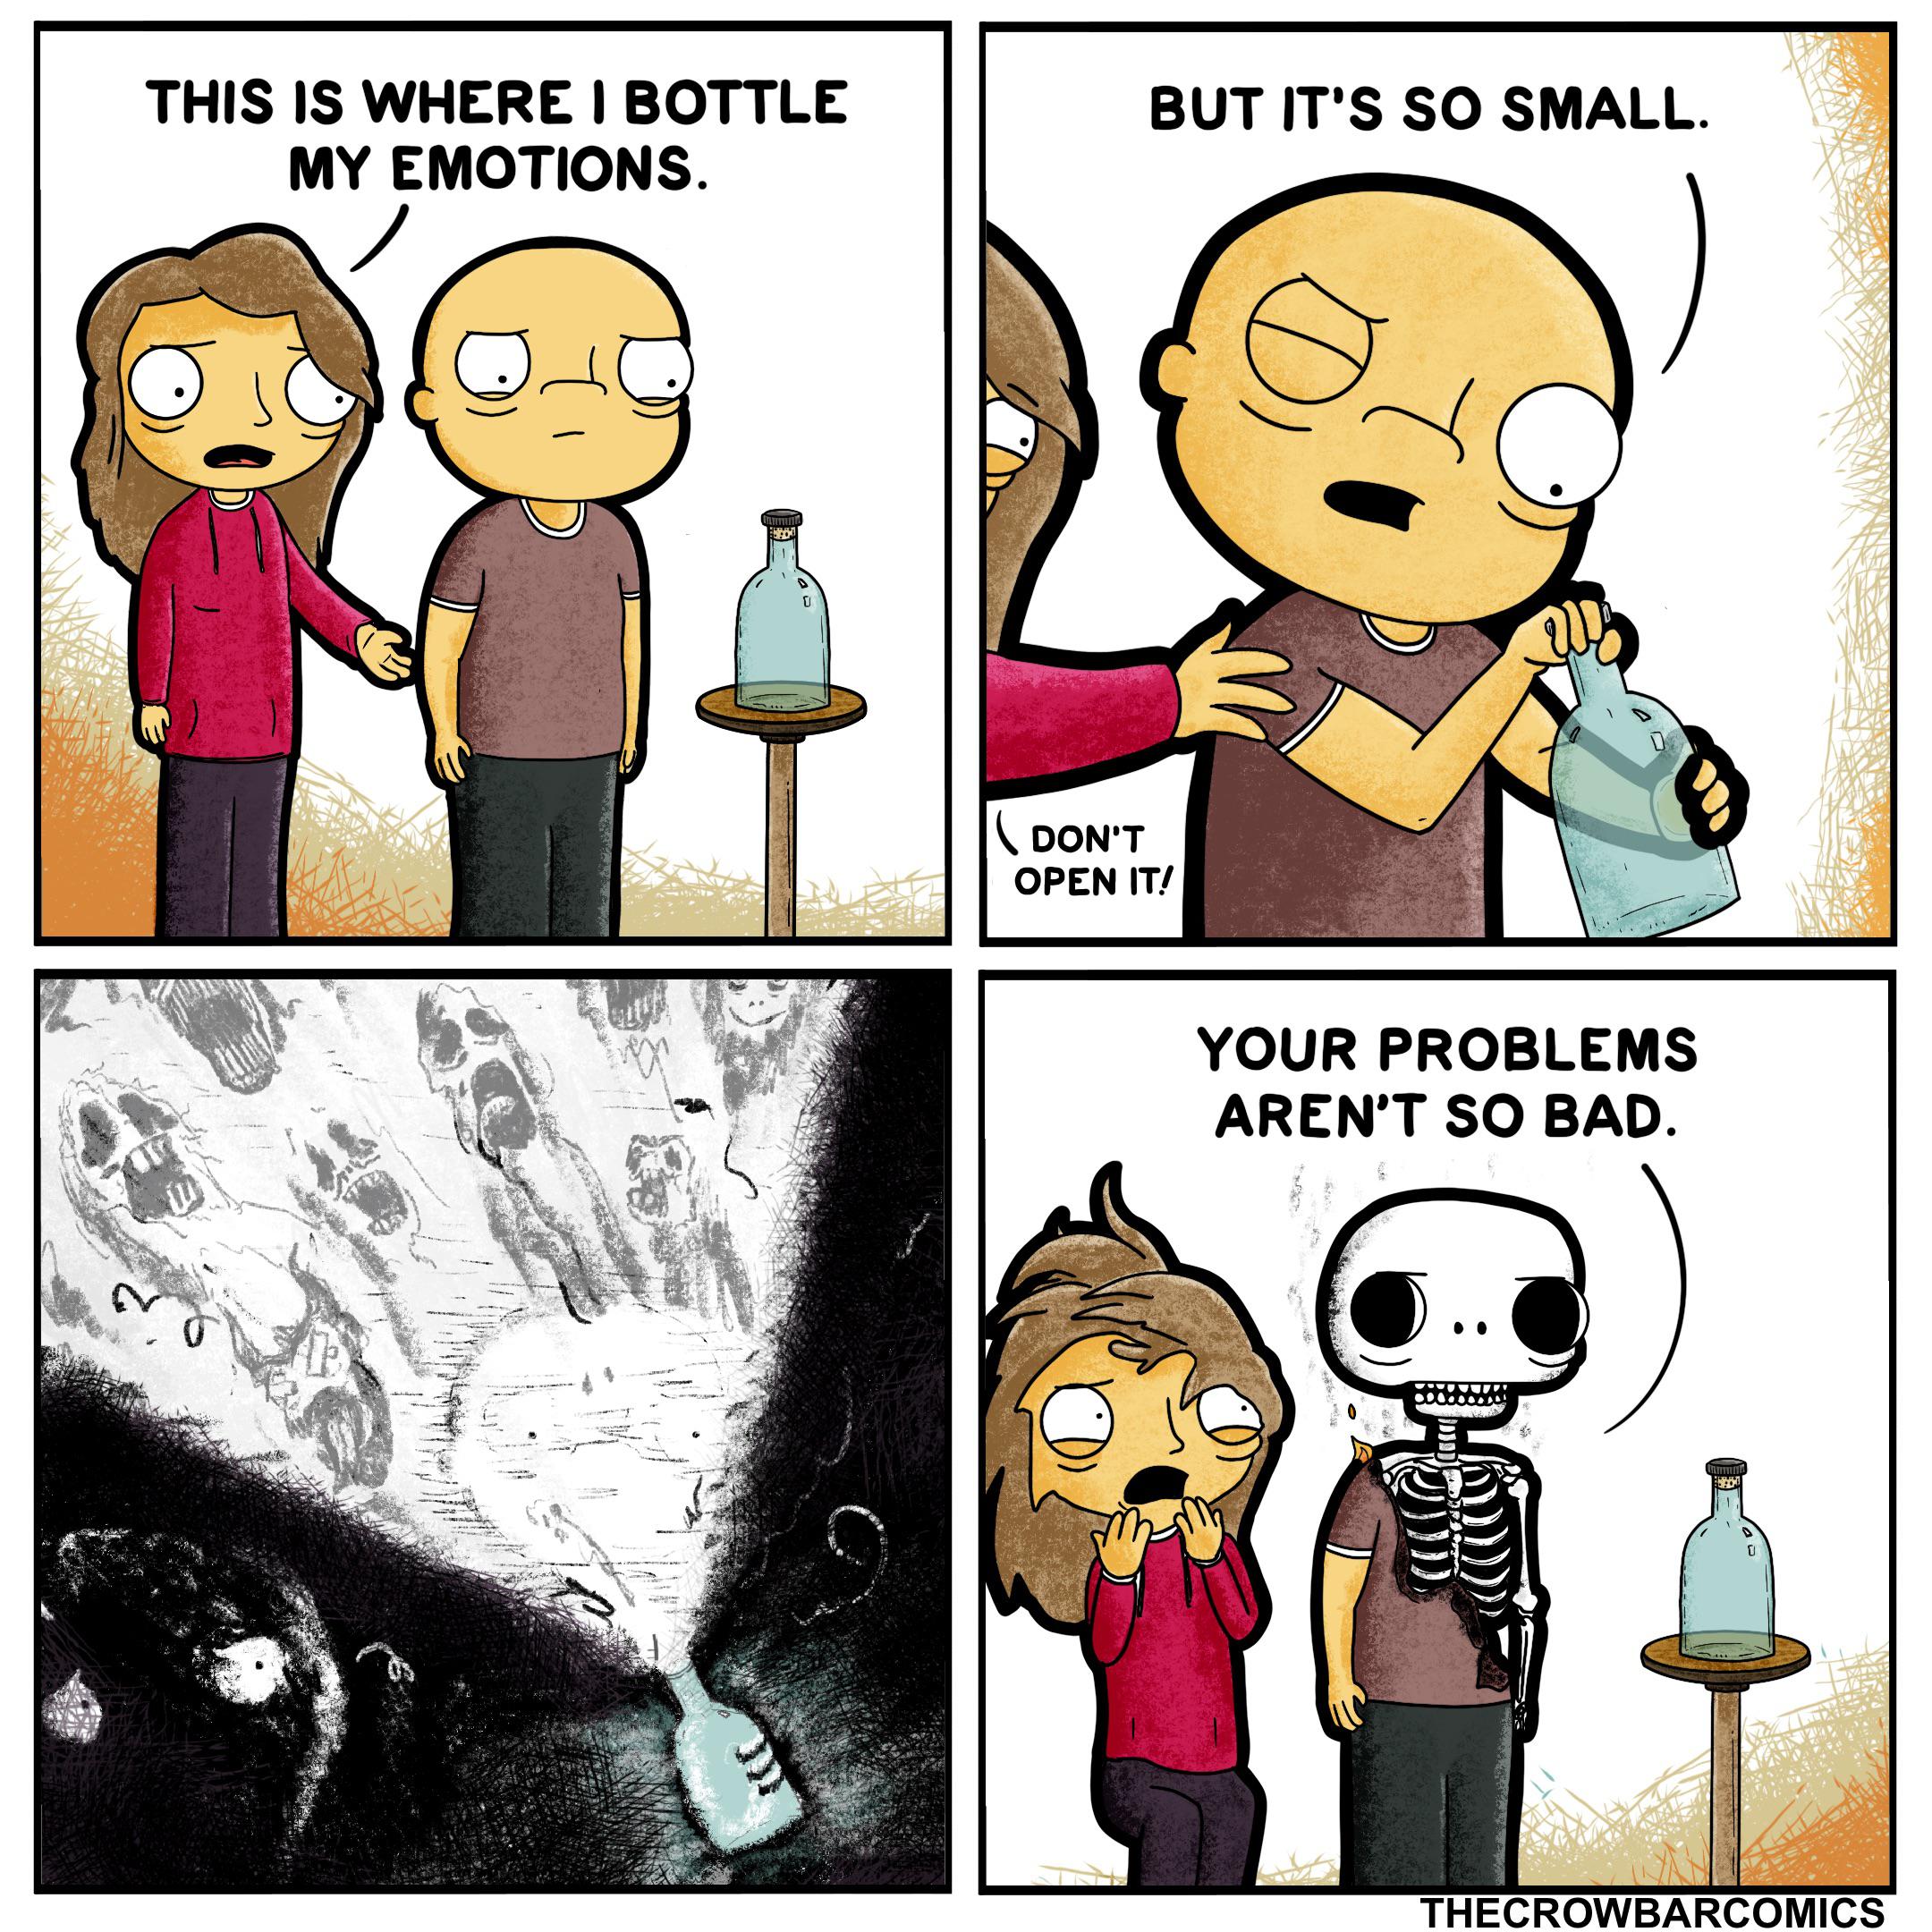 Bottled up. [oc], Stewie Comics Bottled up. [oc], Stewie text: THIS IS WHERE I BOTTLE MY EMOTIONS. BUT IT'S SO SMALL. DON'T OPEN IT! YOUR PROBLEMS AREN'T SO BAD. THECROWBARCOMICS 